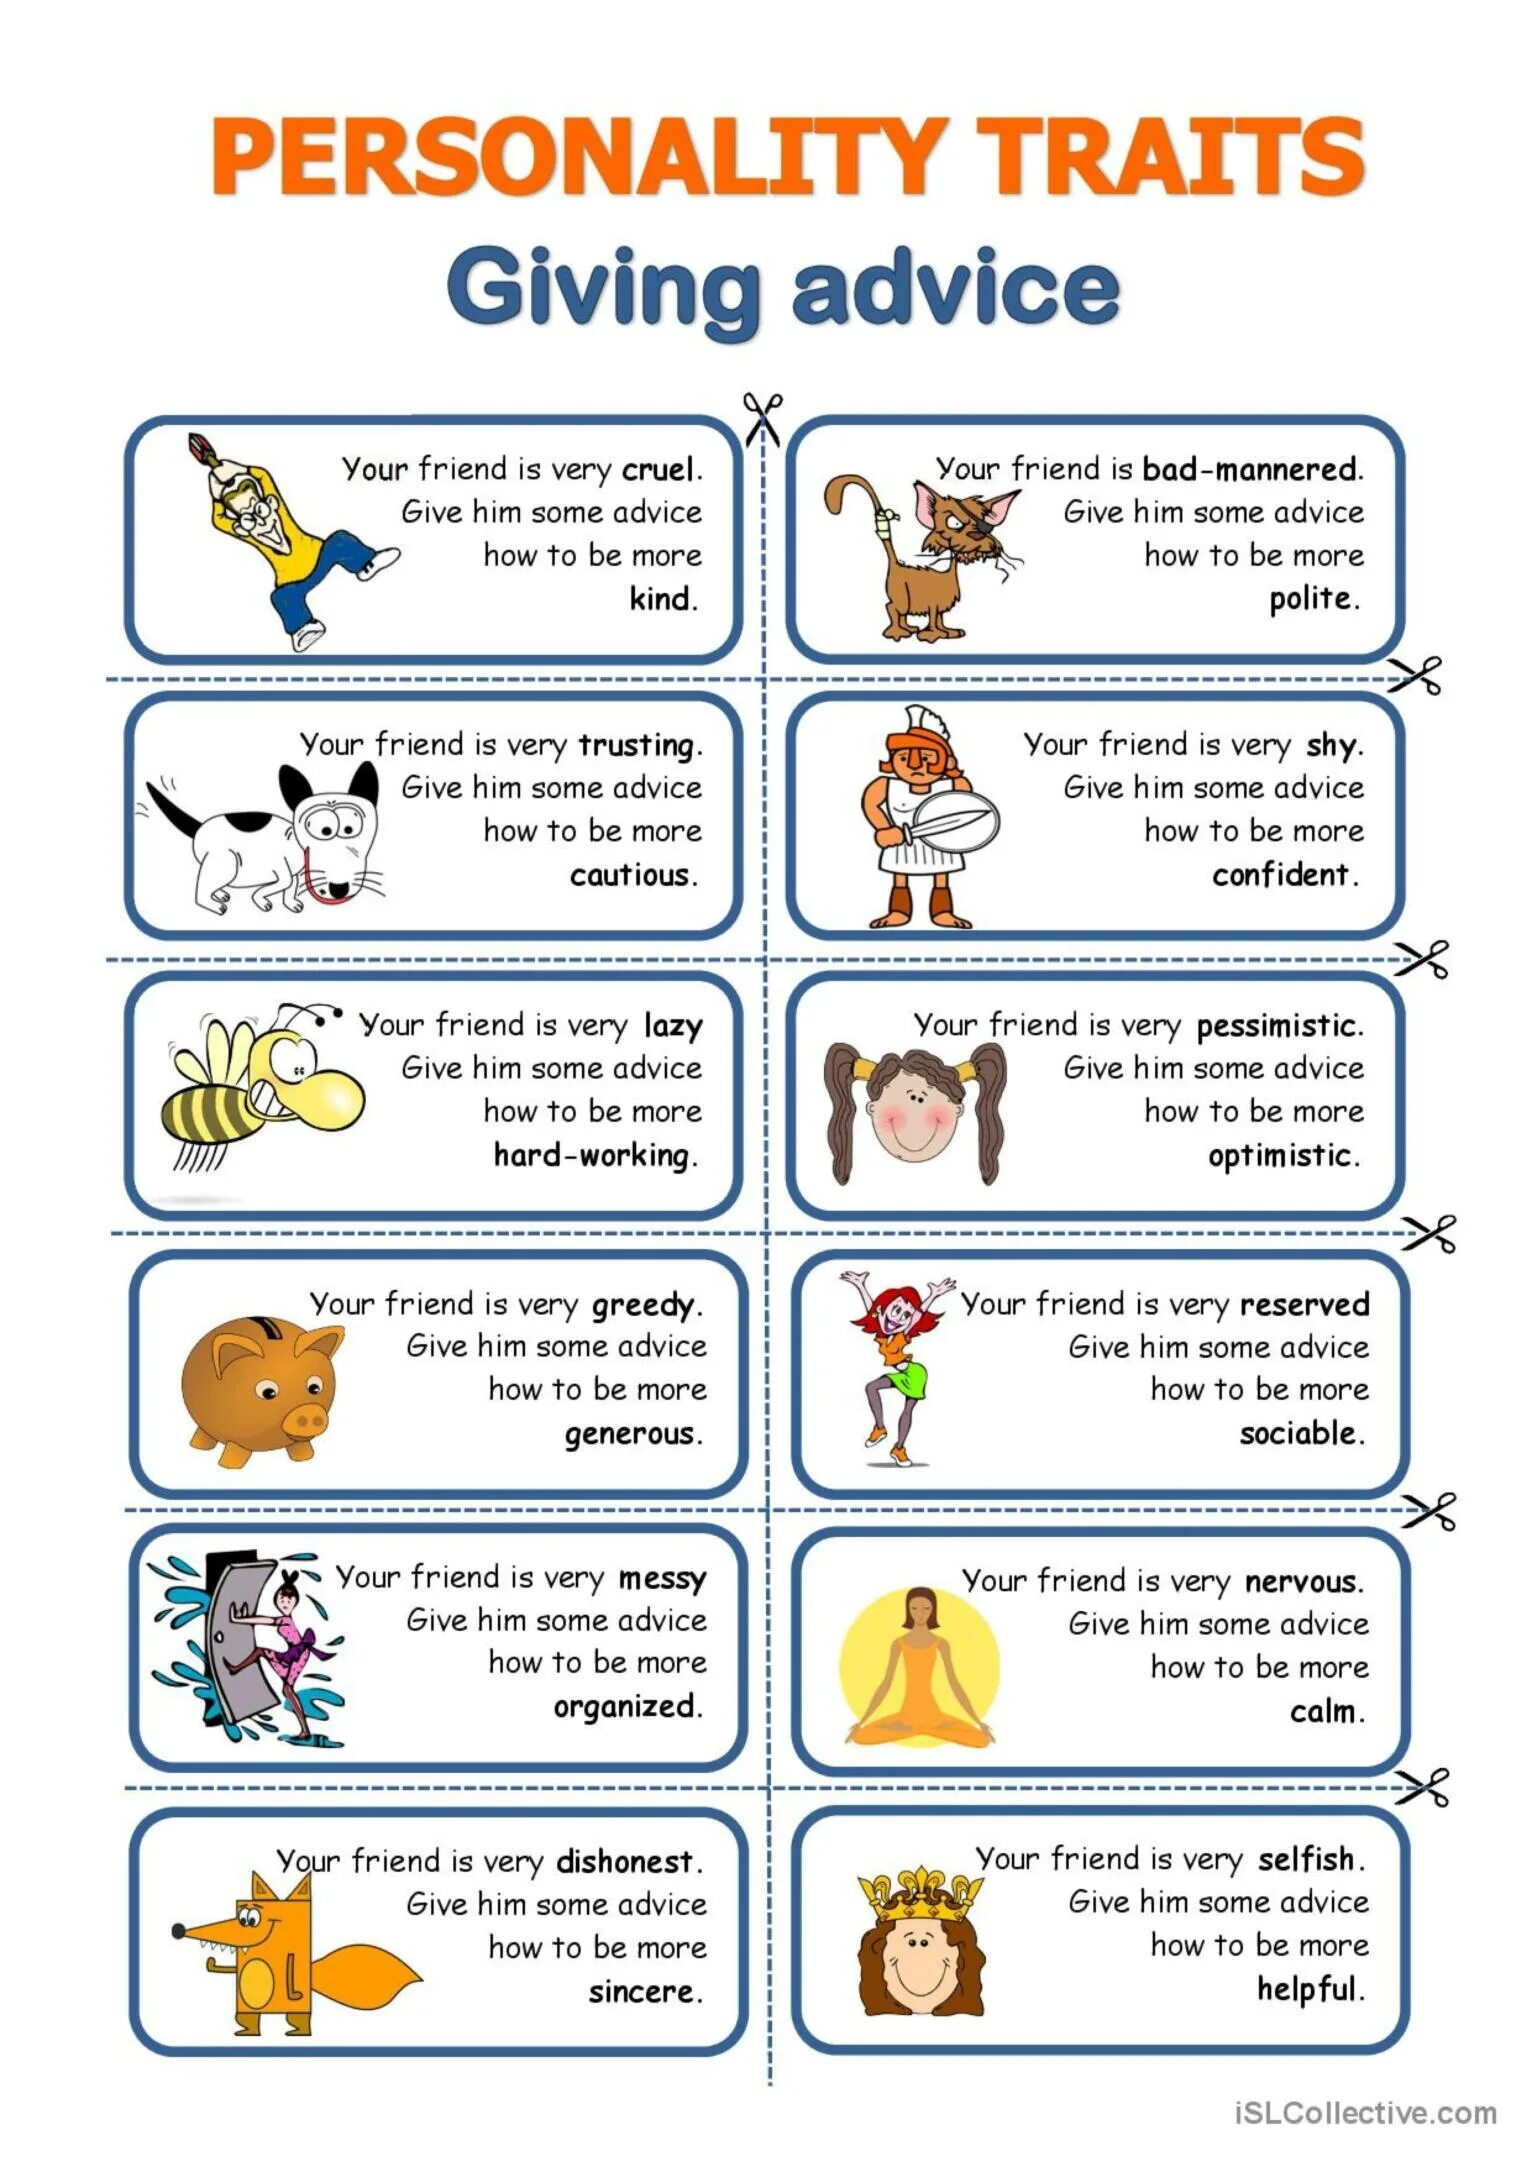 Английский speaking Worksheet. Personality traits giving advice. Speaking Cards английскому языку. Английский язык speaking activity. Character questions